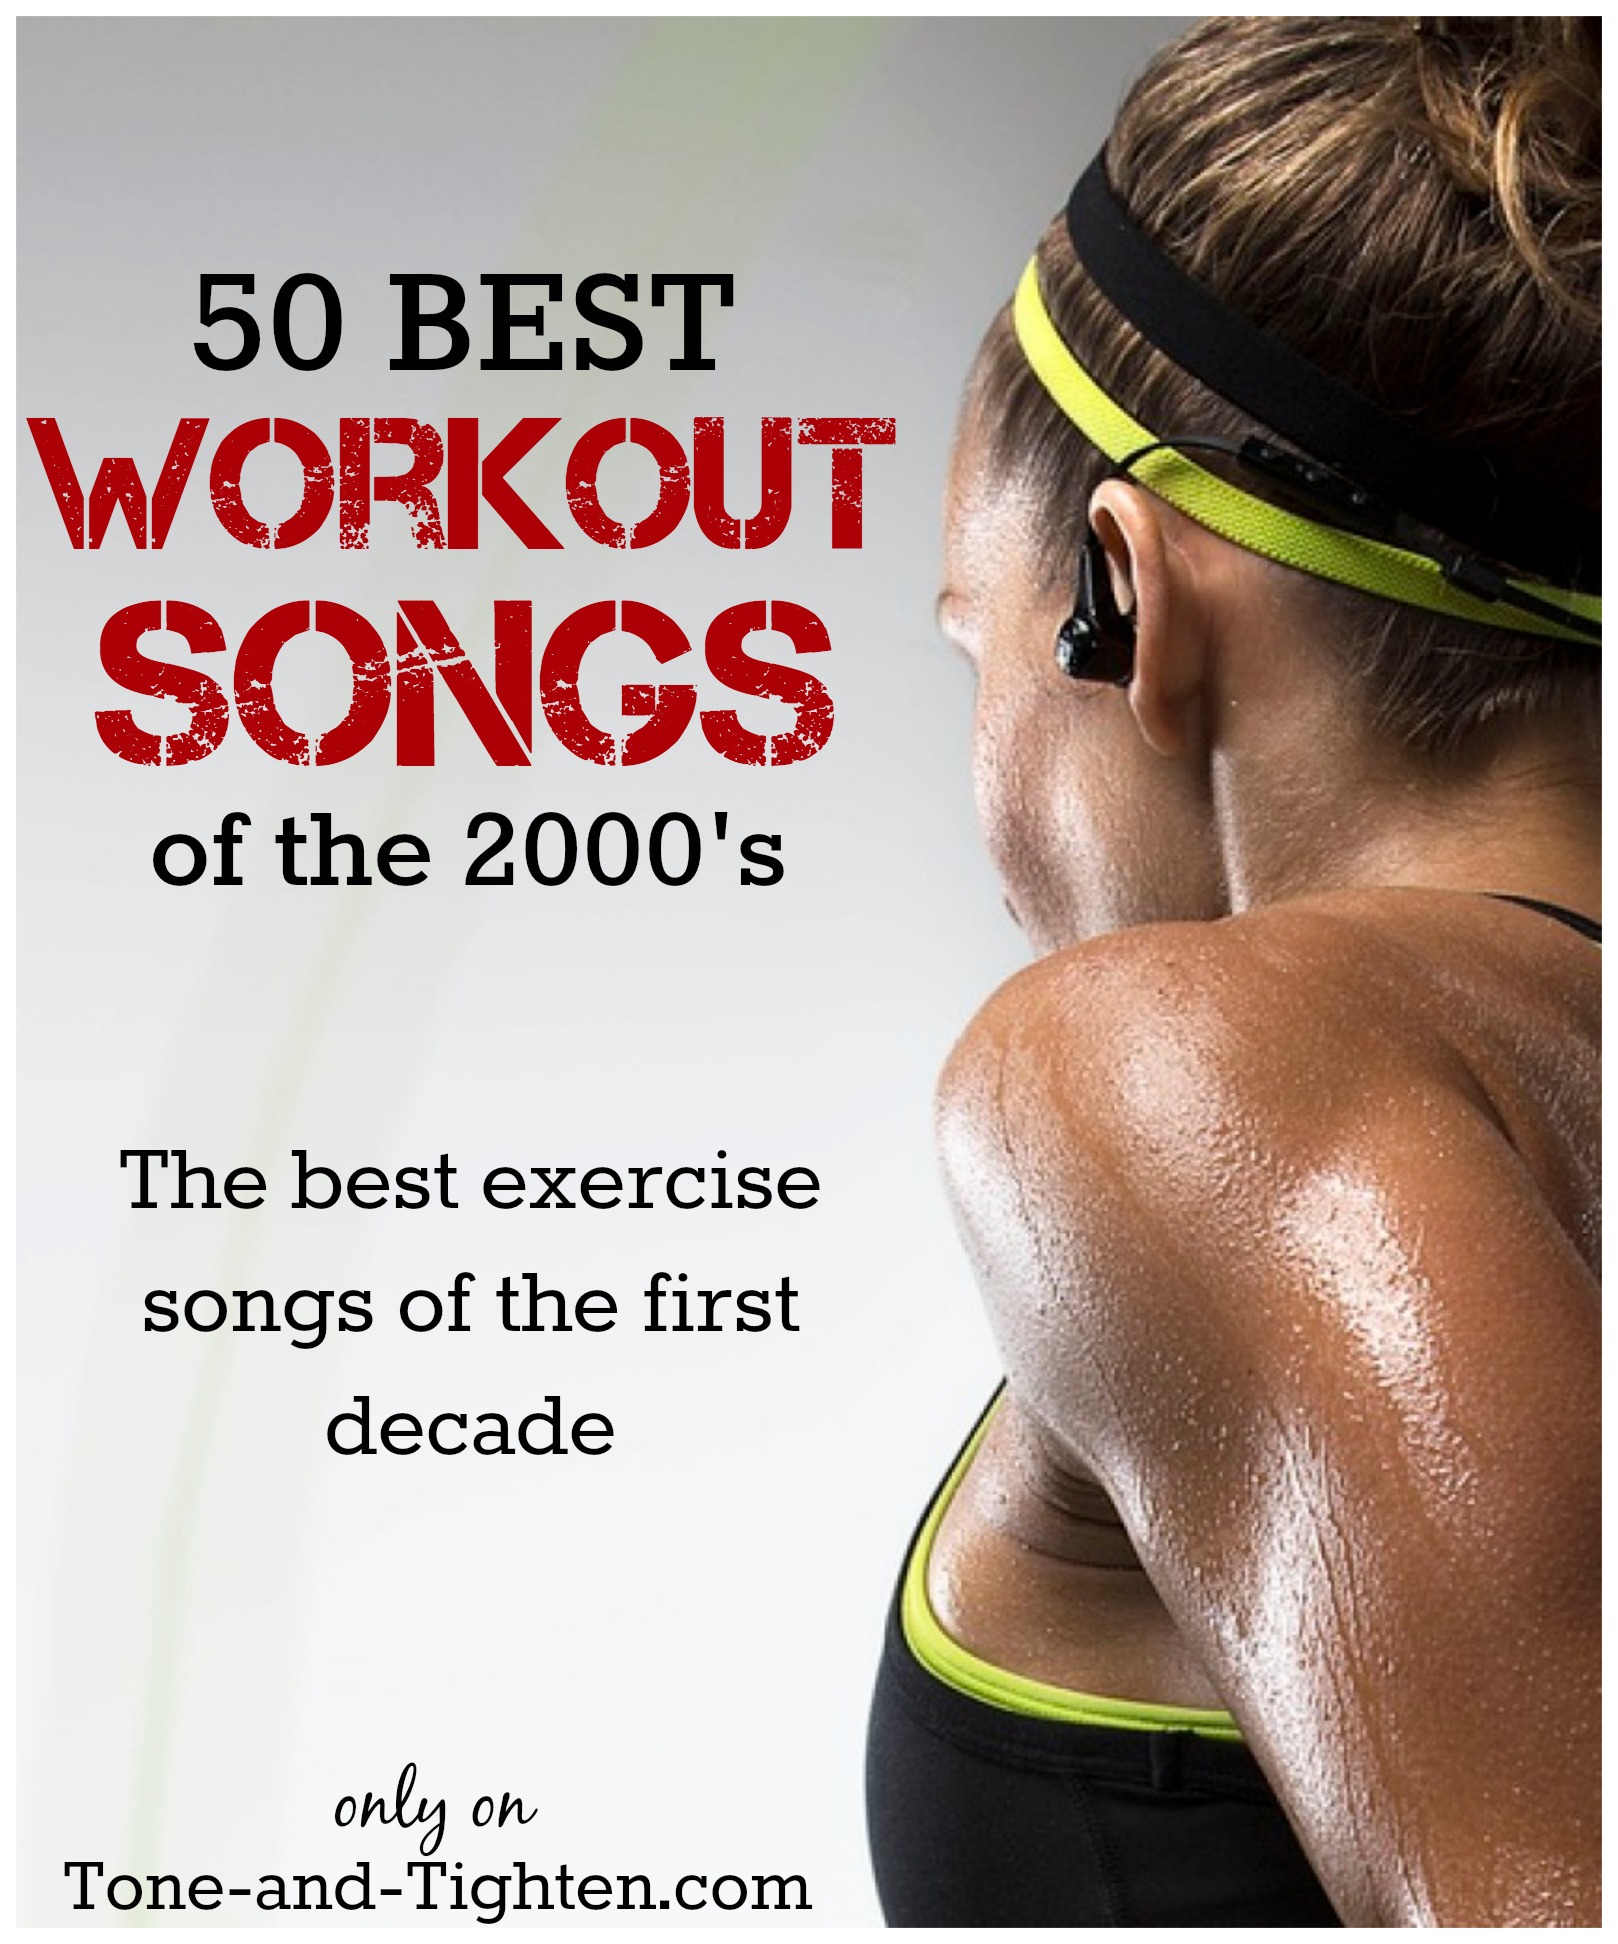 Best Workout Songs of the 2000’s Great playlist for your next workout